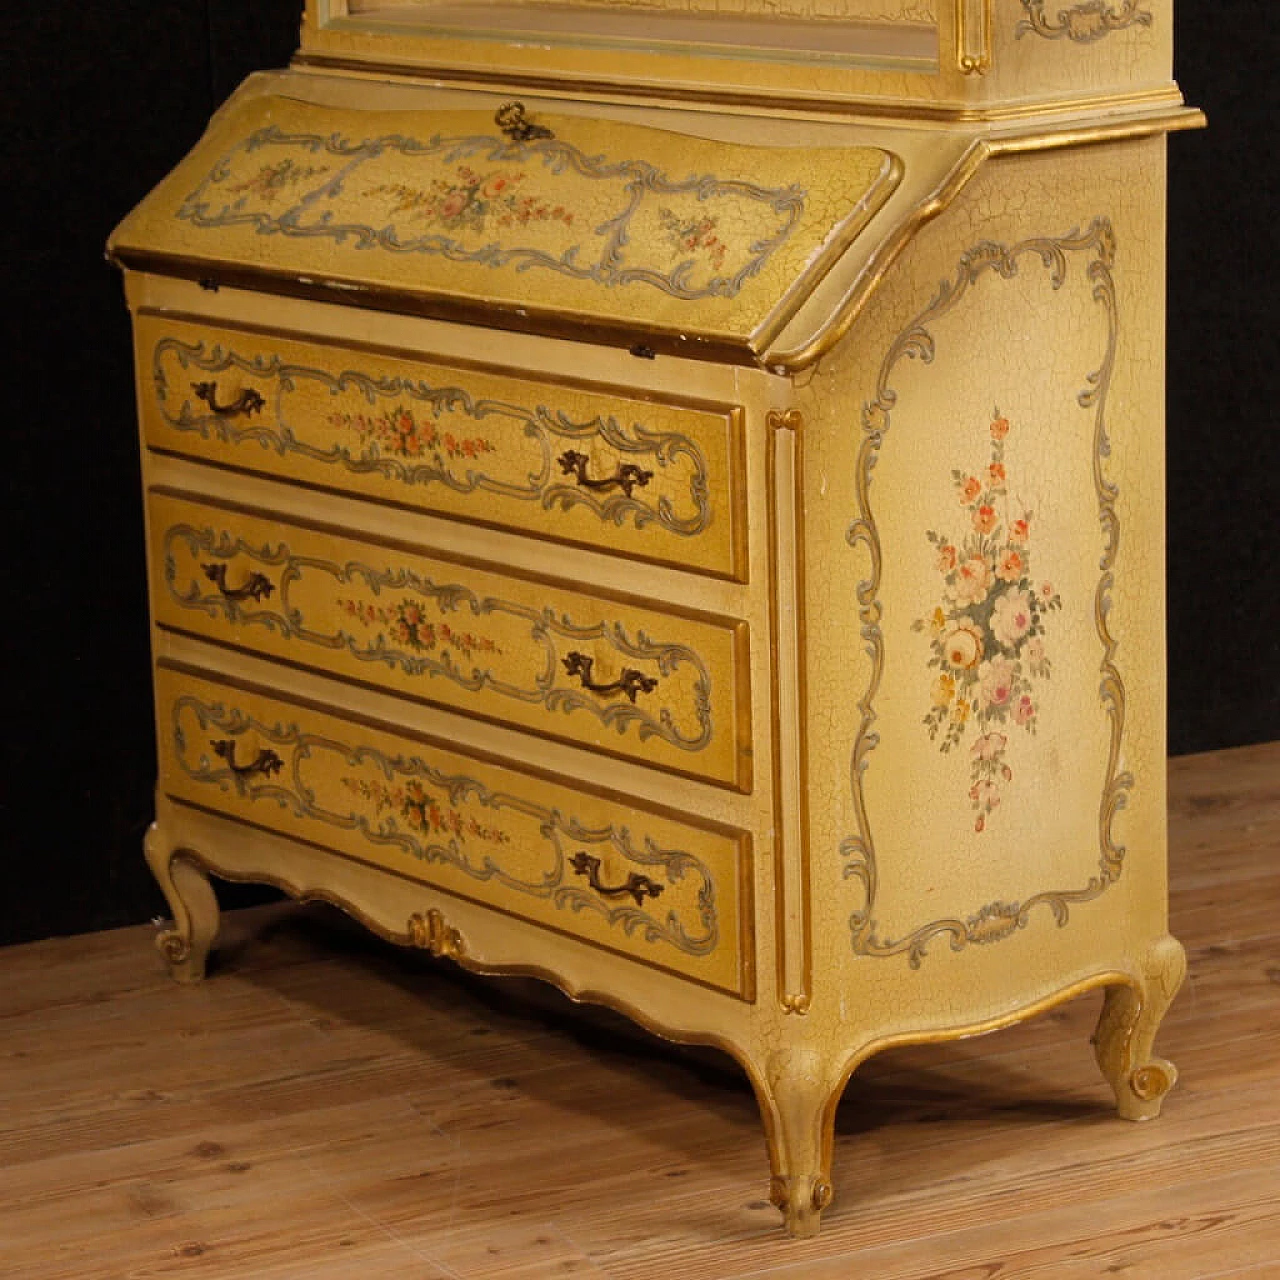 Venetian lacquered, gilded and painted wood trumeau 10